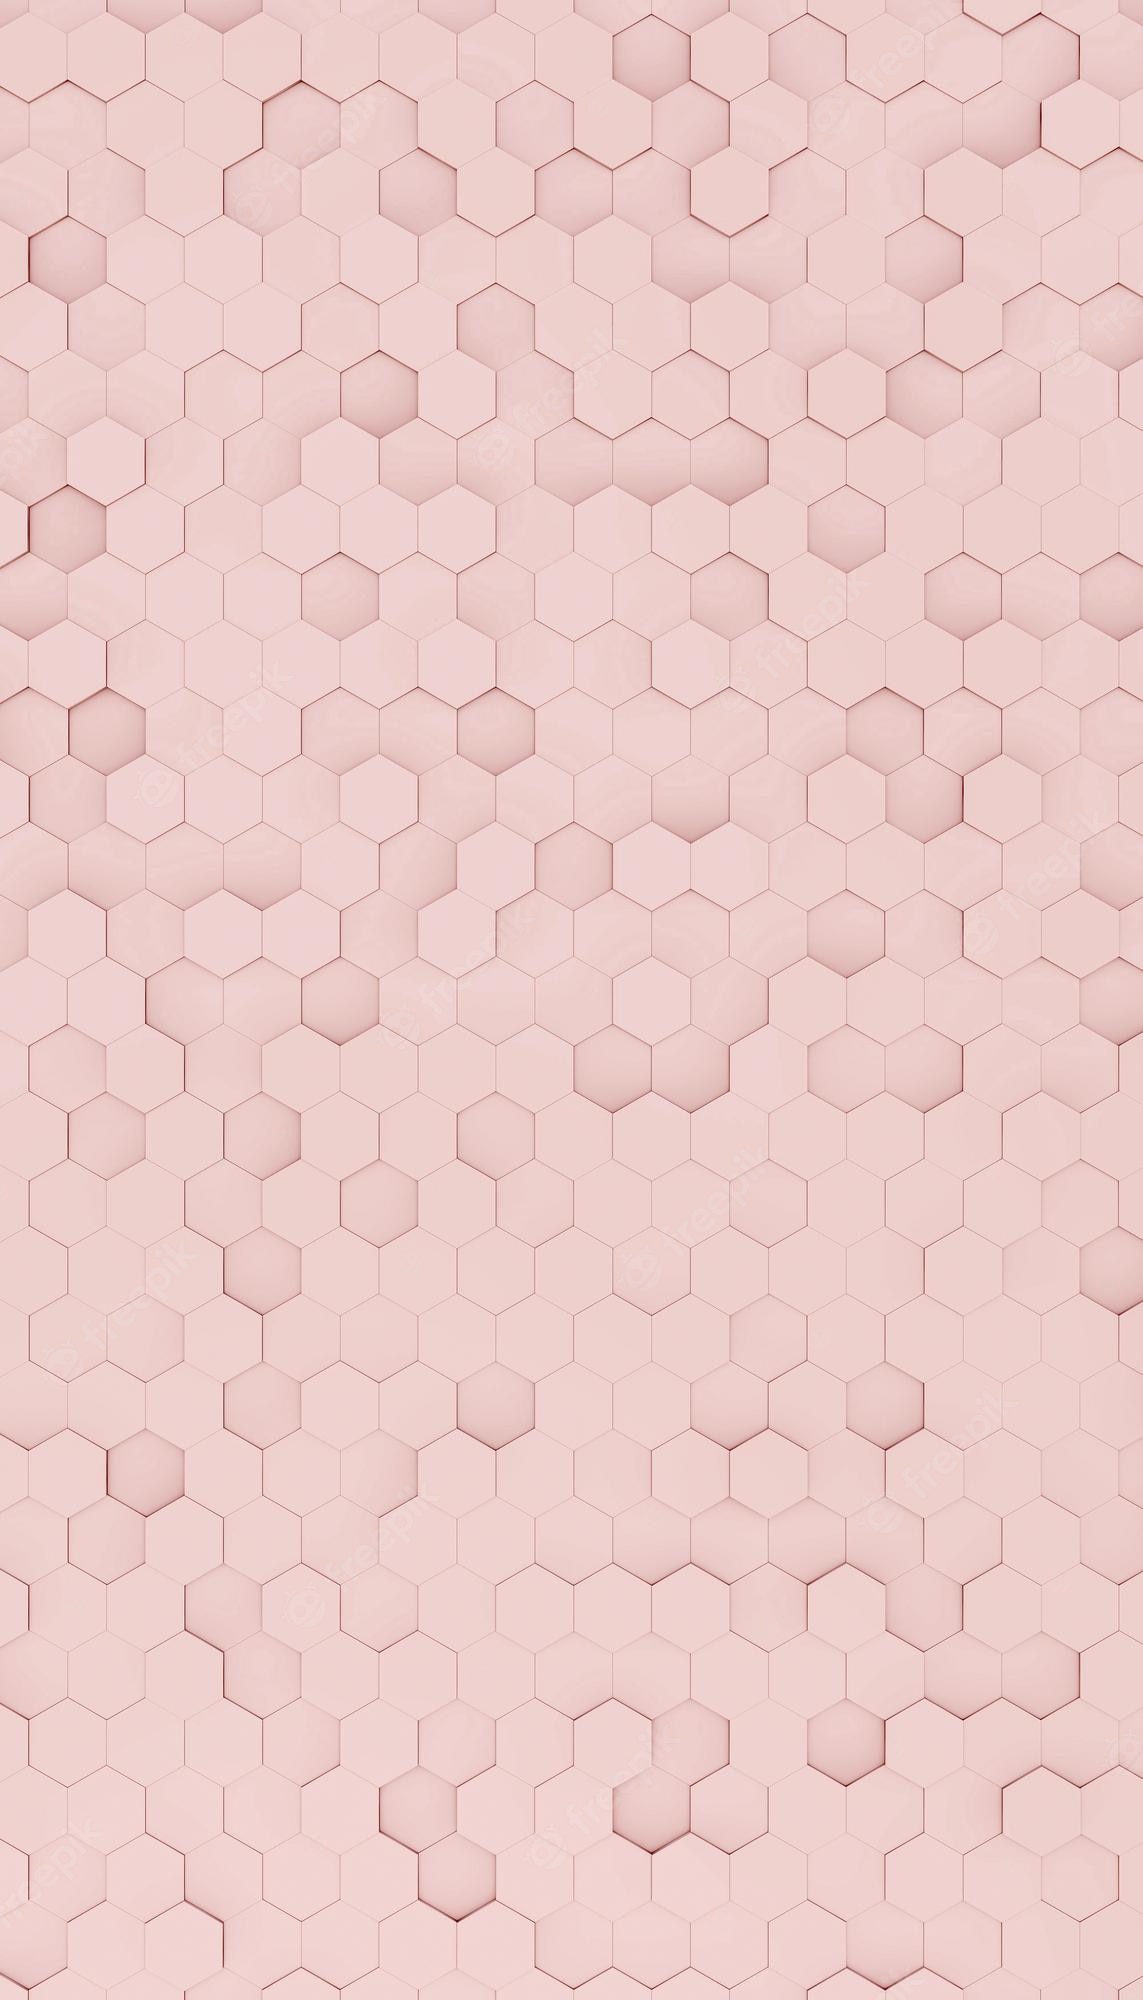 A pink background with hexagonal shapes - Makeup